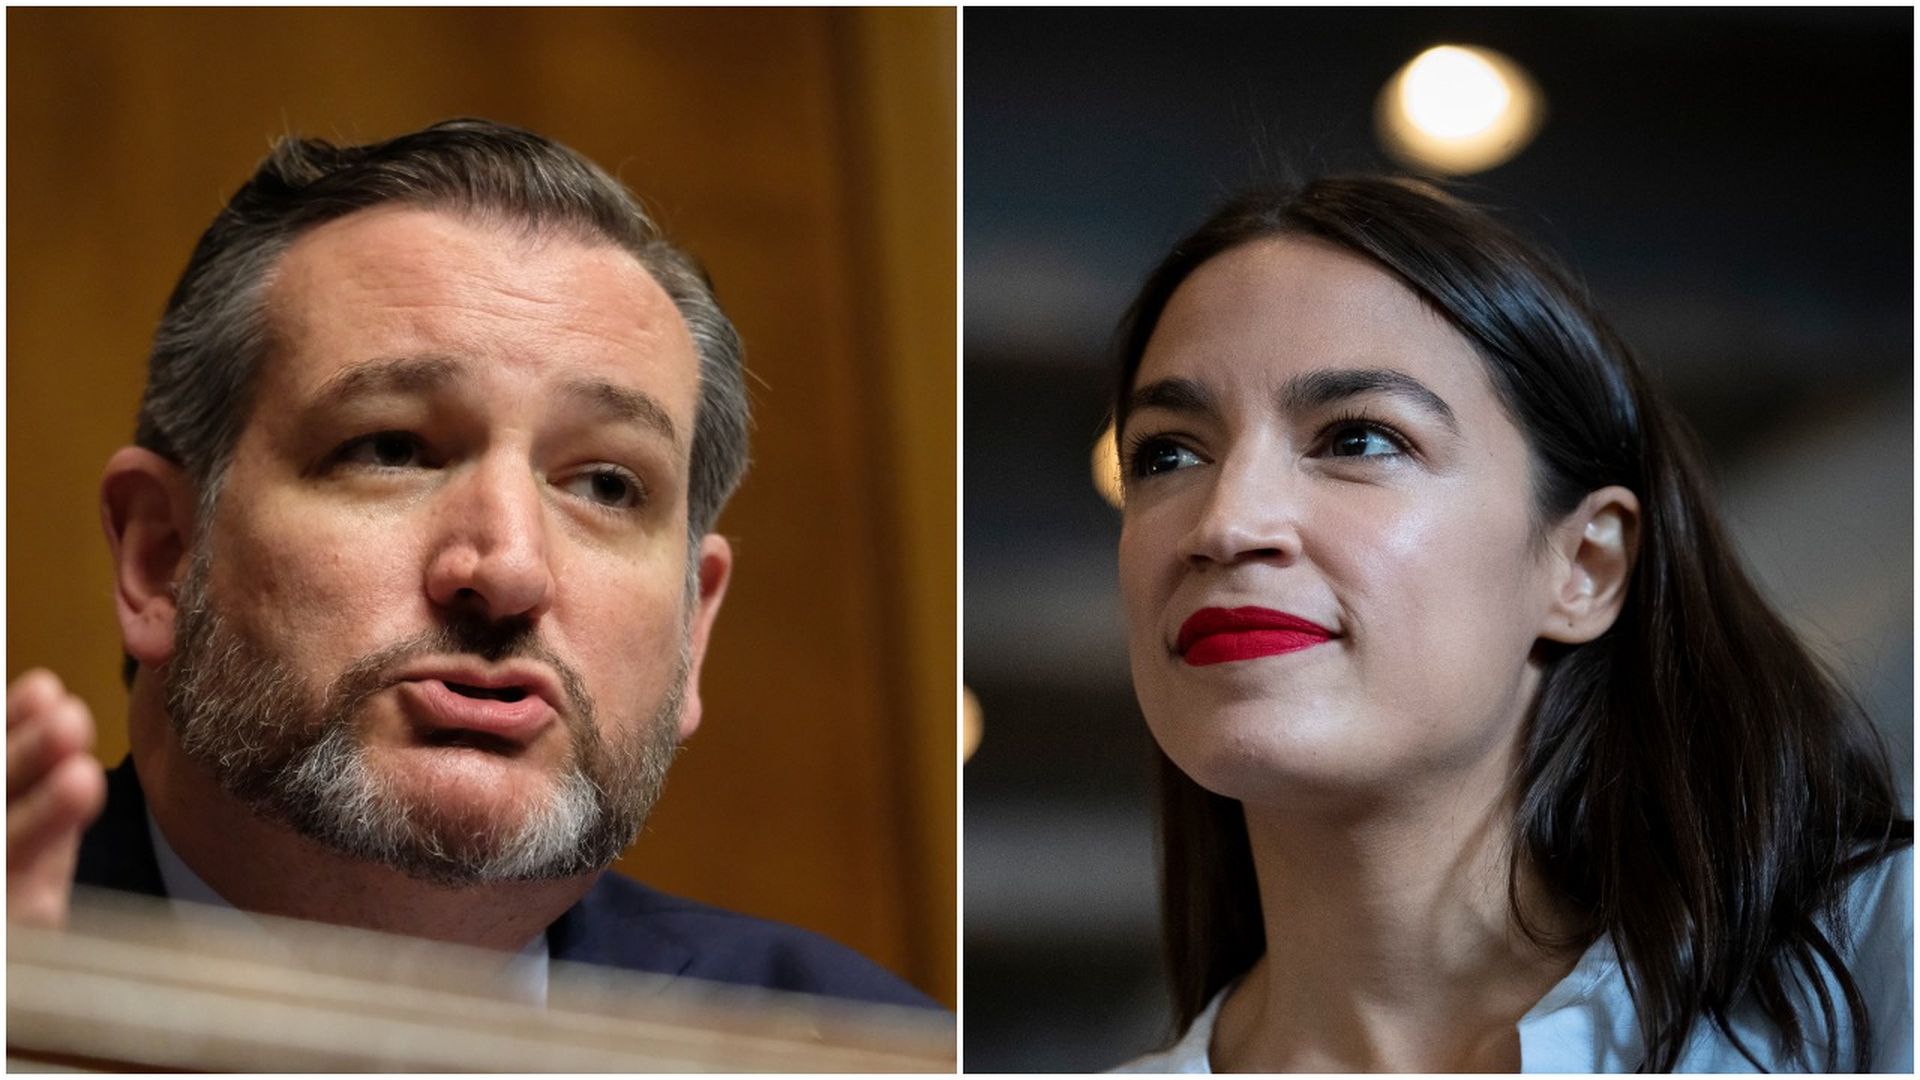 This image is a split screen of Ted Cruz speaking on the left and AOC listening on the right.